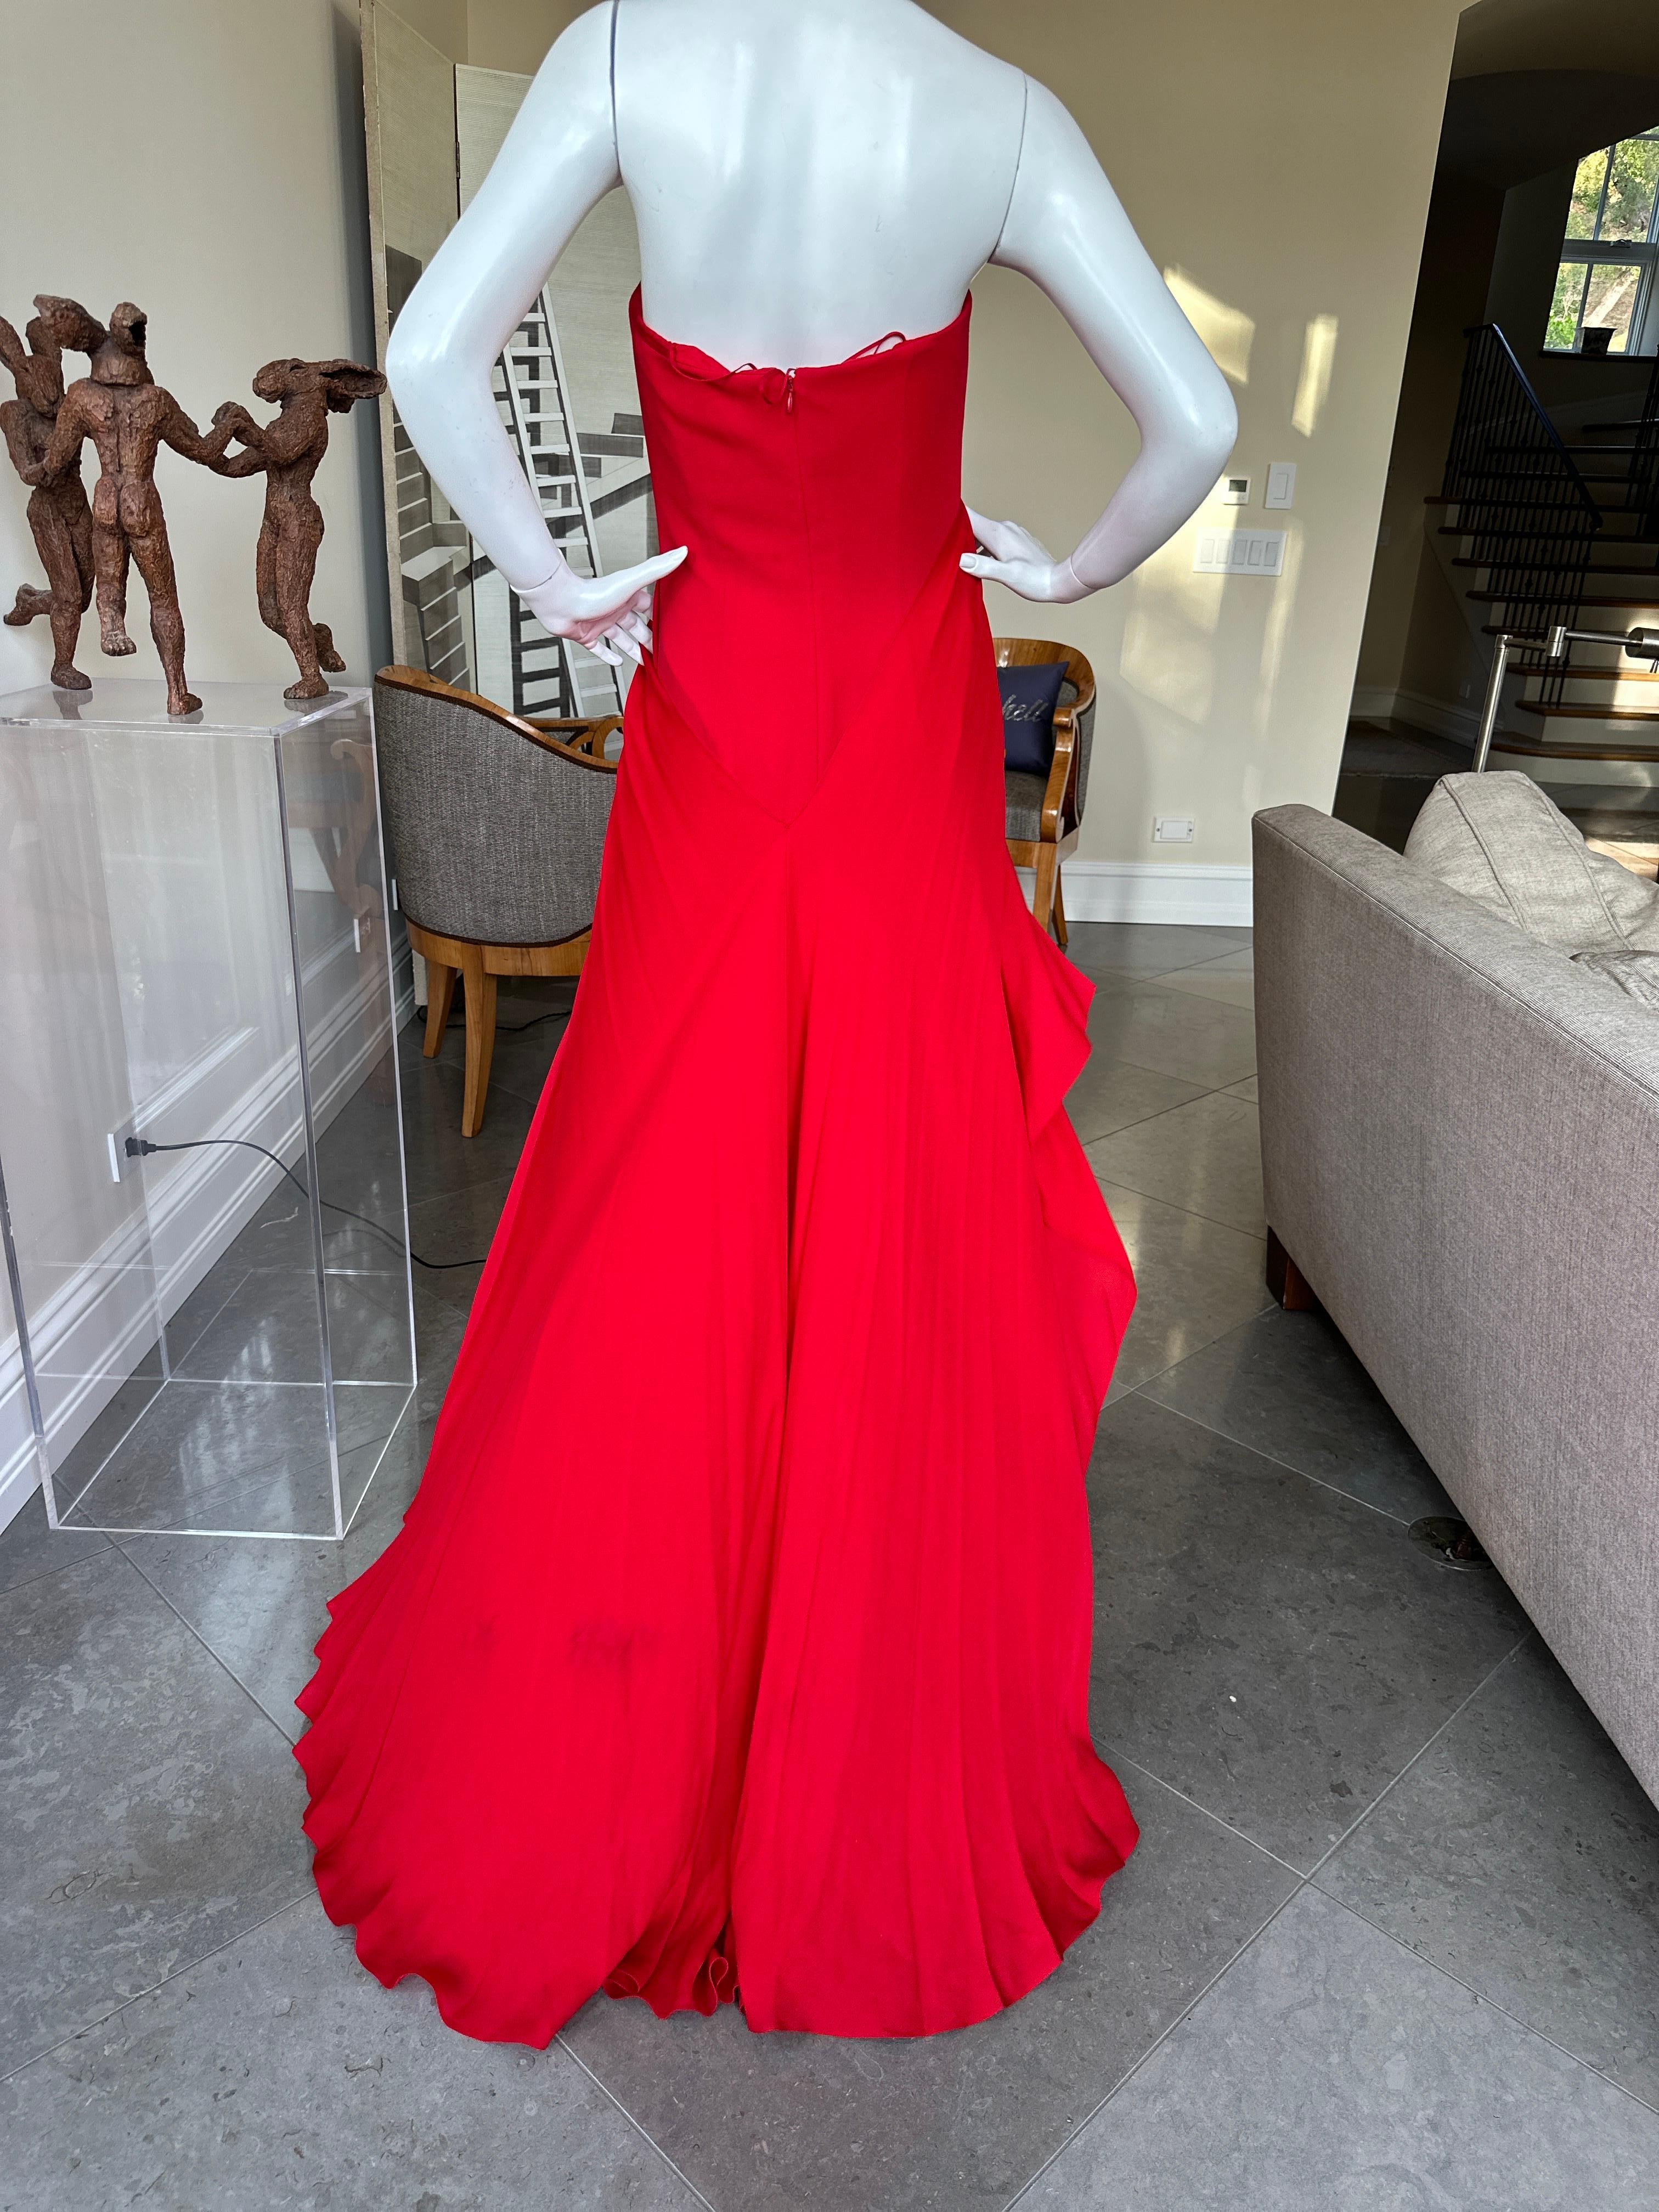 Bill Blass Vintage 1980's Red Silk Evening Dress with Attached Cape For Sale 4